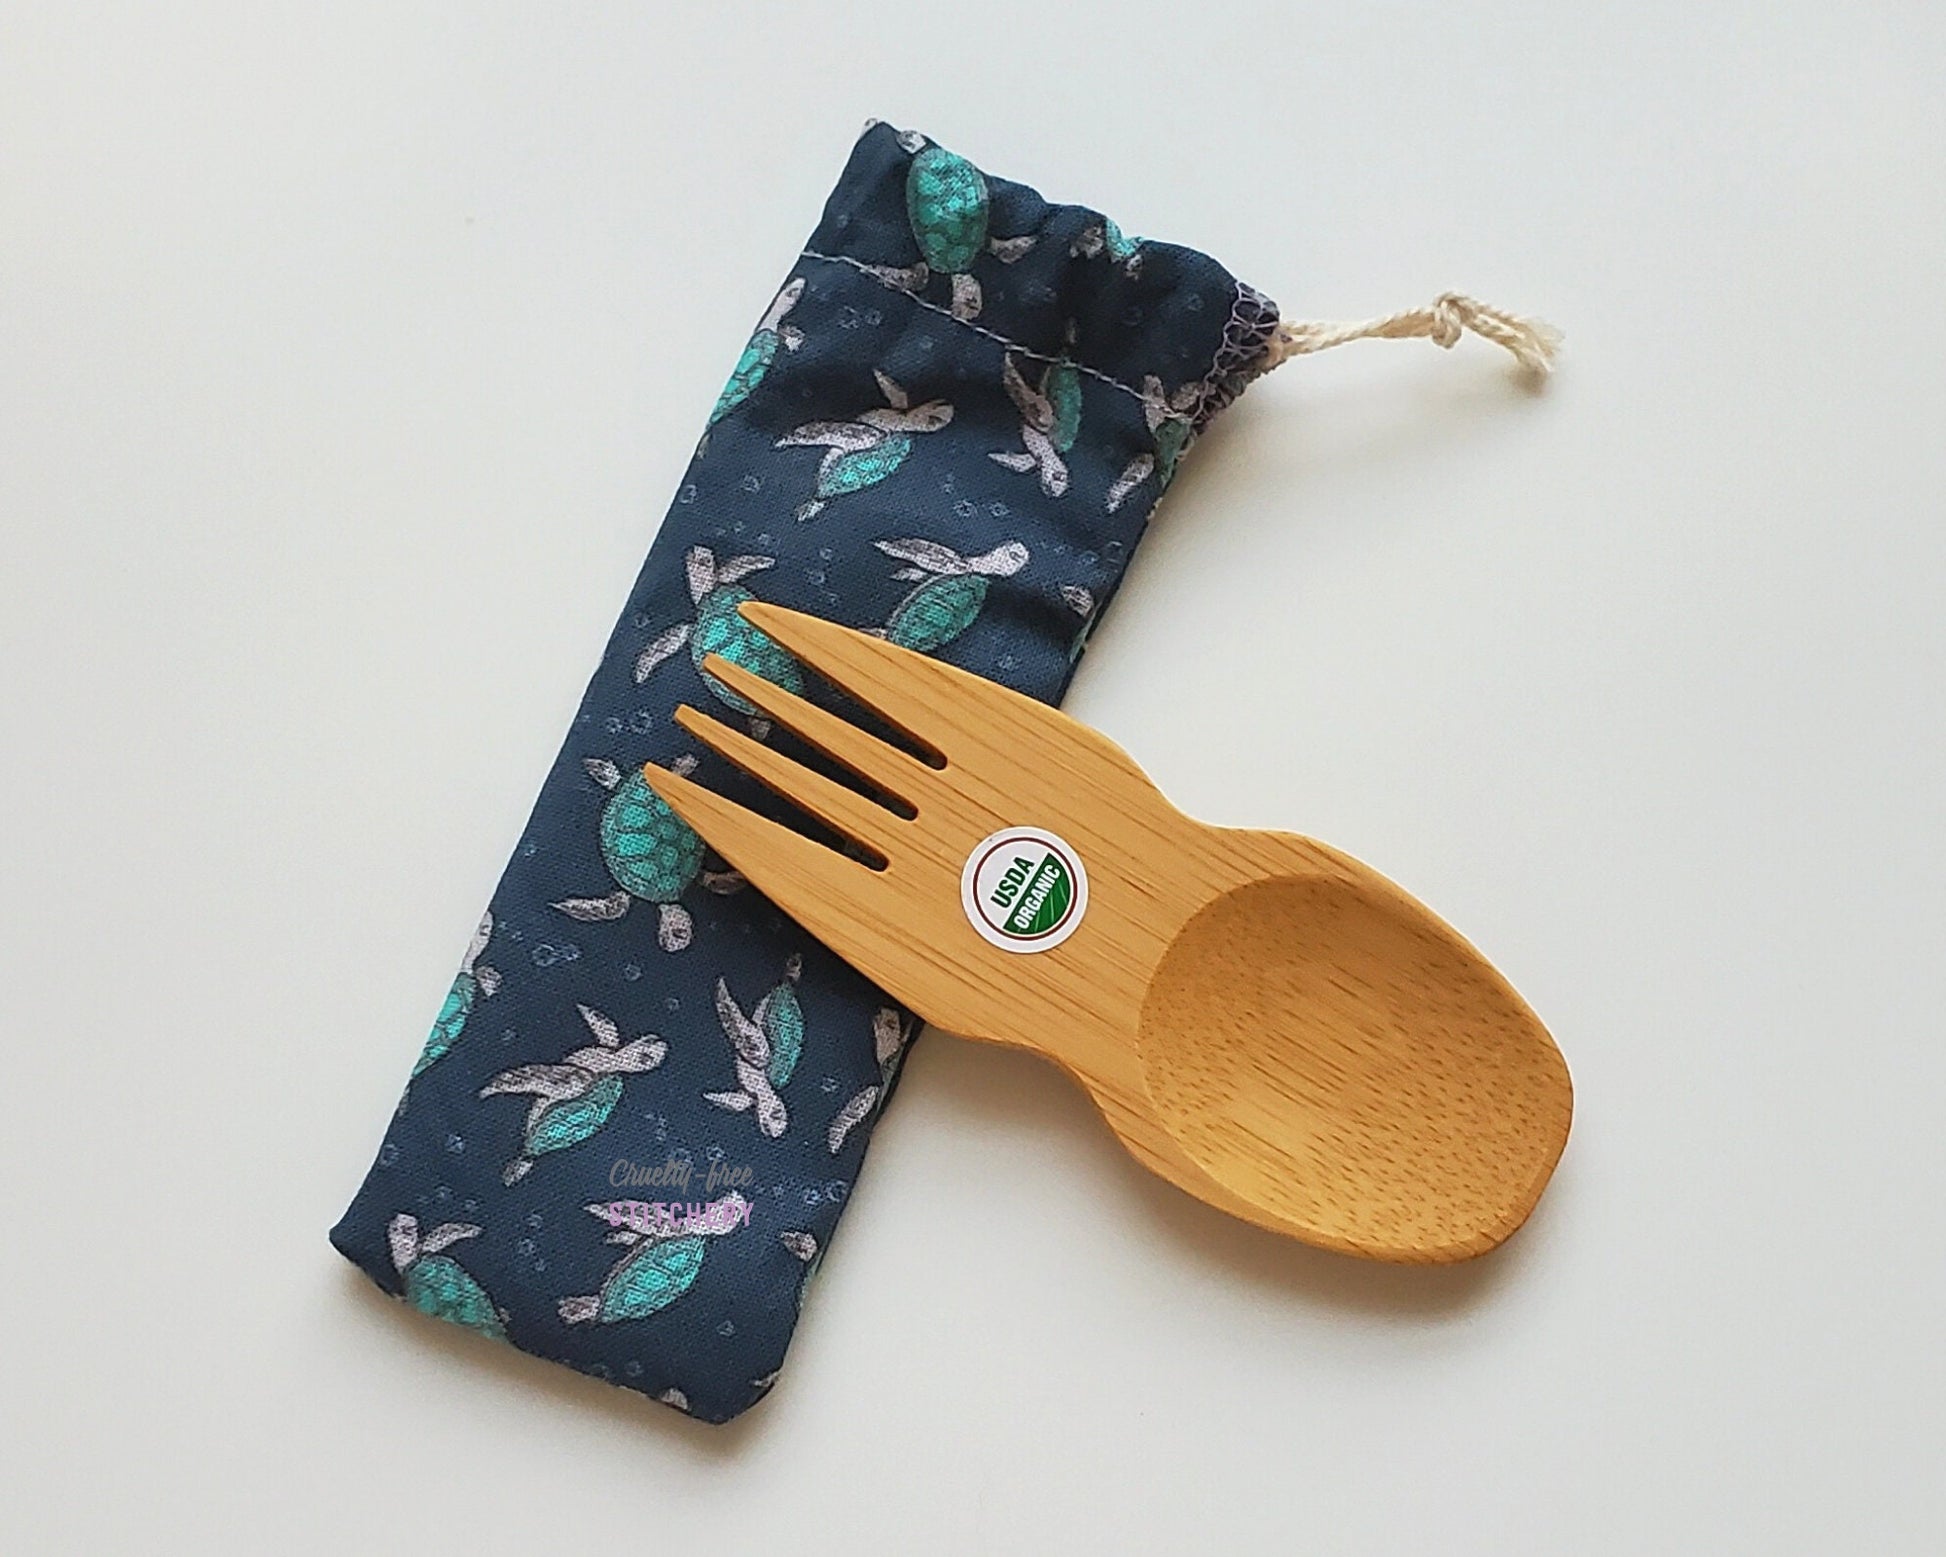 Reusable bamboo spork with pouch. The pouch is a dark navy blue fabric with tiny sea turtles. The pouch is sitting diagonally with the spork partially on top pointing the other way. The spork is small, a double ended fork and spoon.